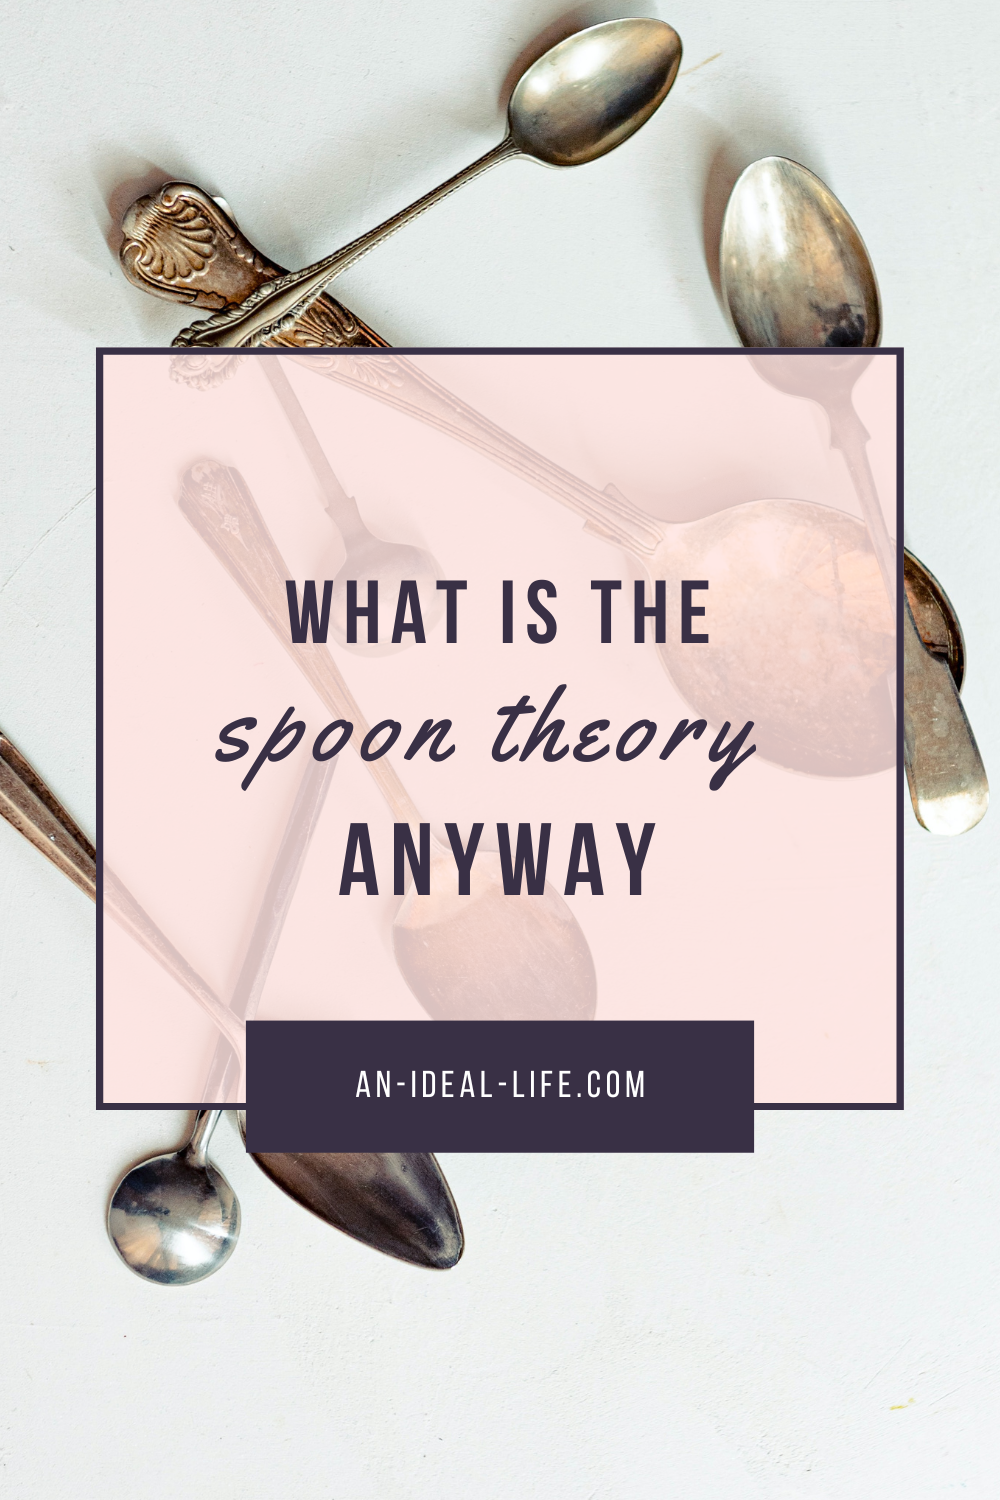 What is the spoon theory anyway?